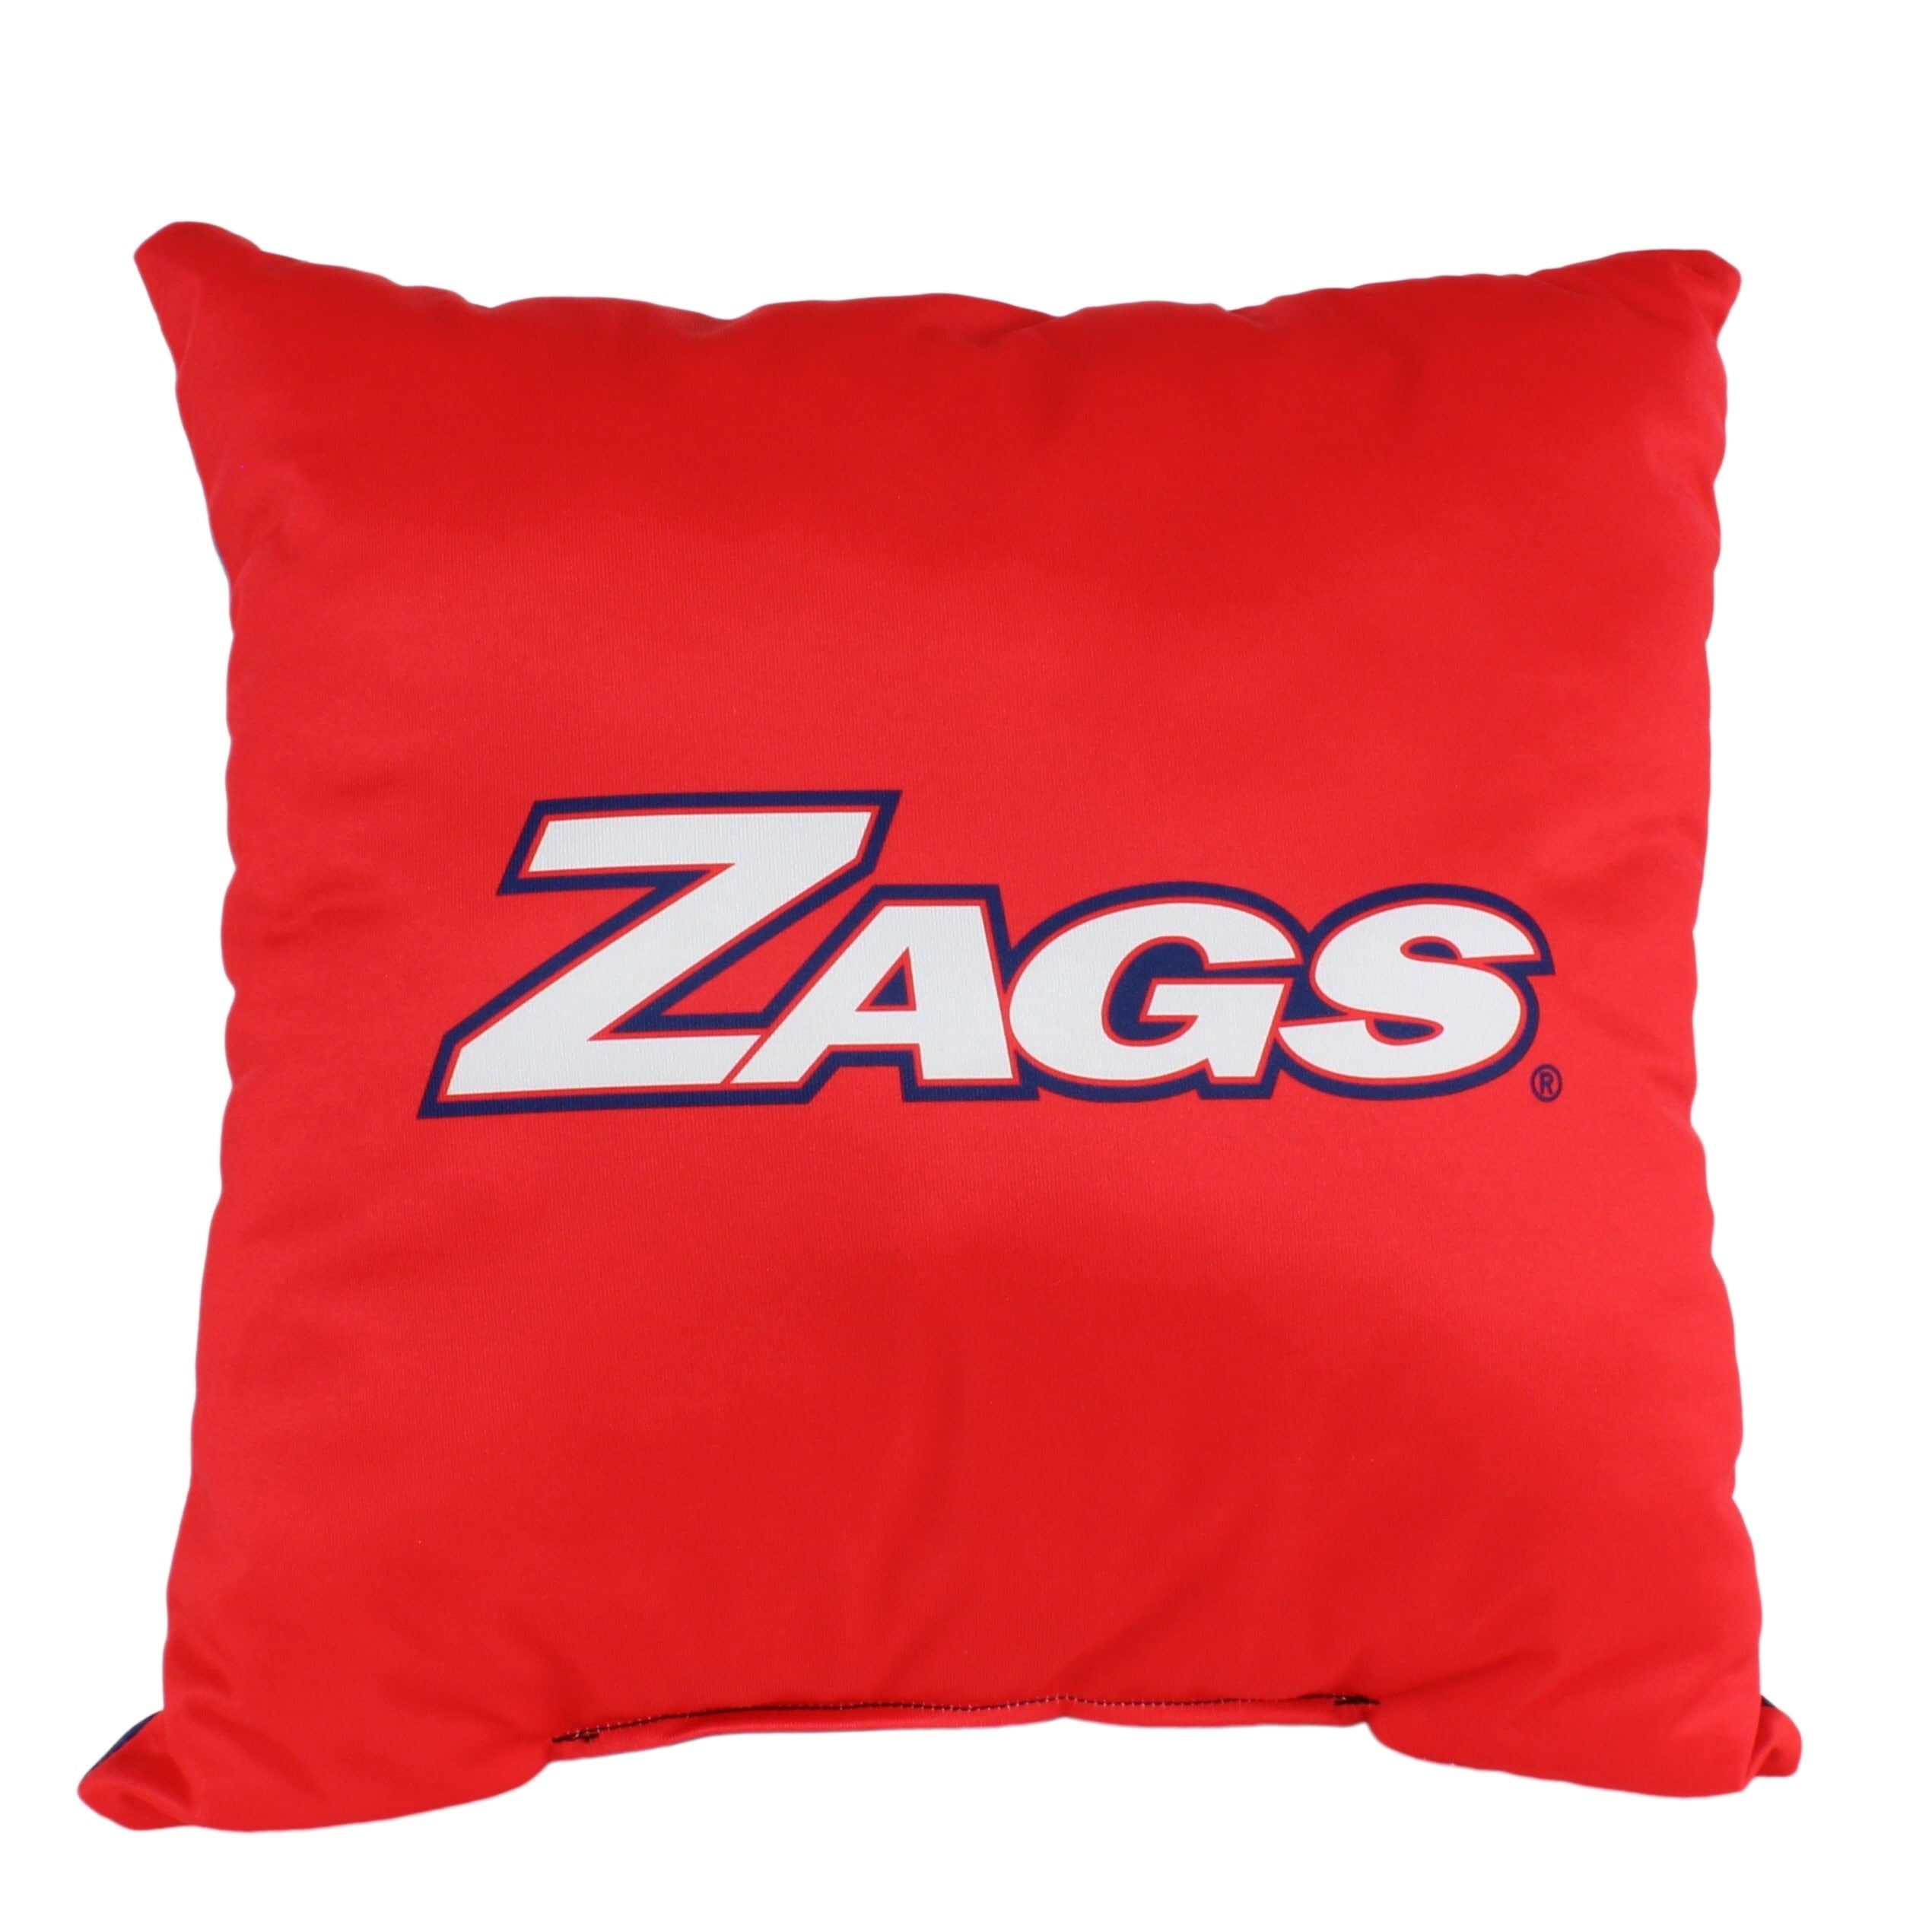 Gonzaga Bulldogs 16 Inch Decorative Throw Pillow Multi Color Sports Traditional Polyester One Single Reversible